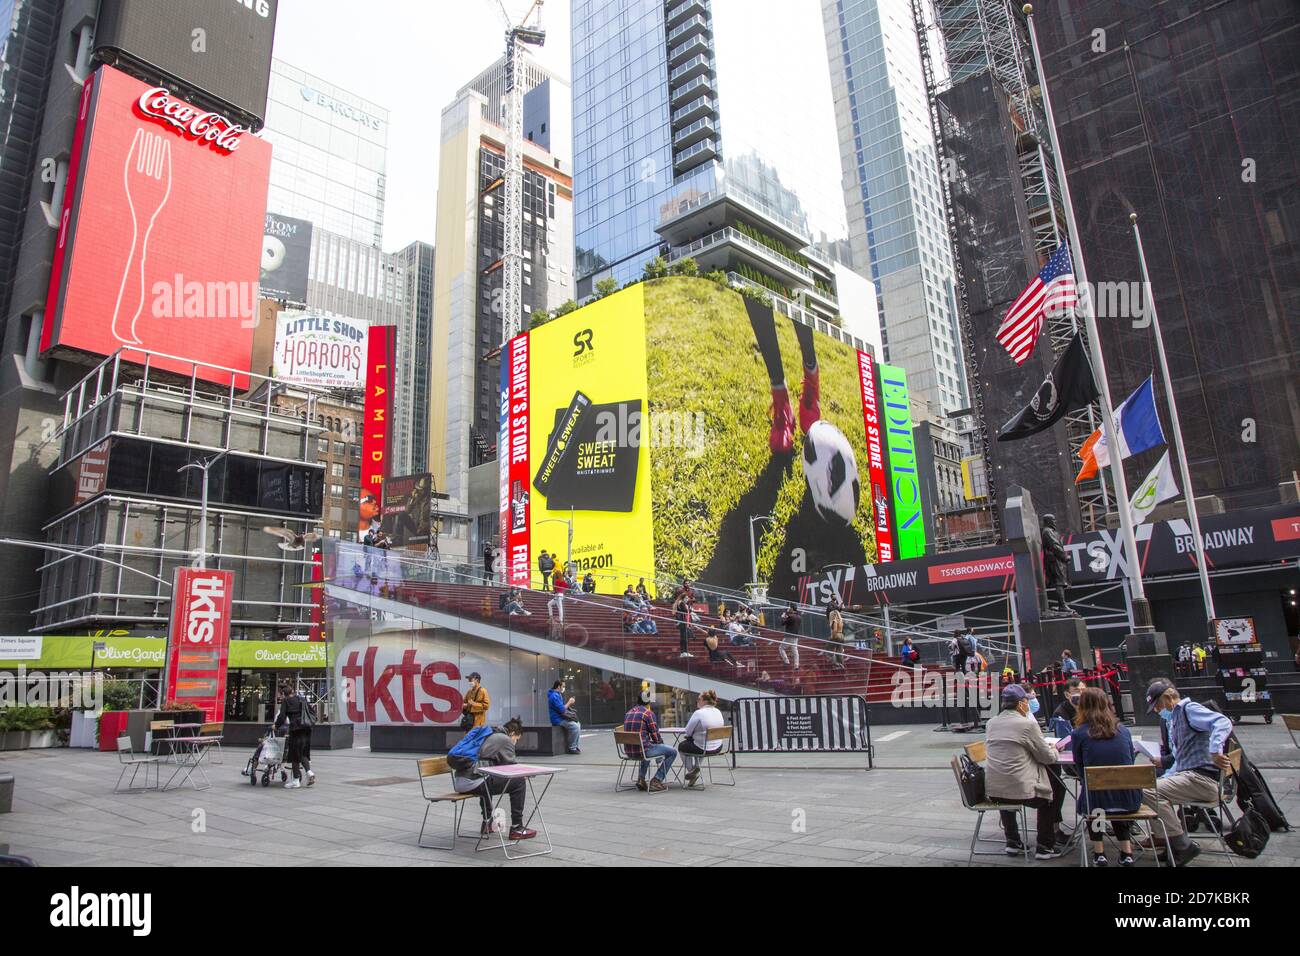 People and tourists are returning to Times Square in the autumn of 2020 when the Covid-19 pandemic seems to be on the retreat or atleast has leveled off. New York City. Stock Photo